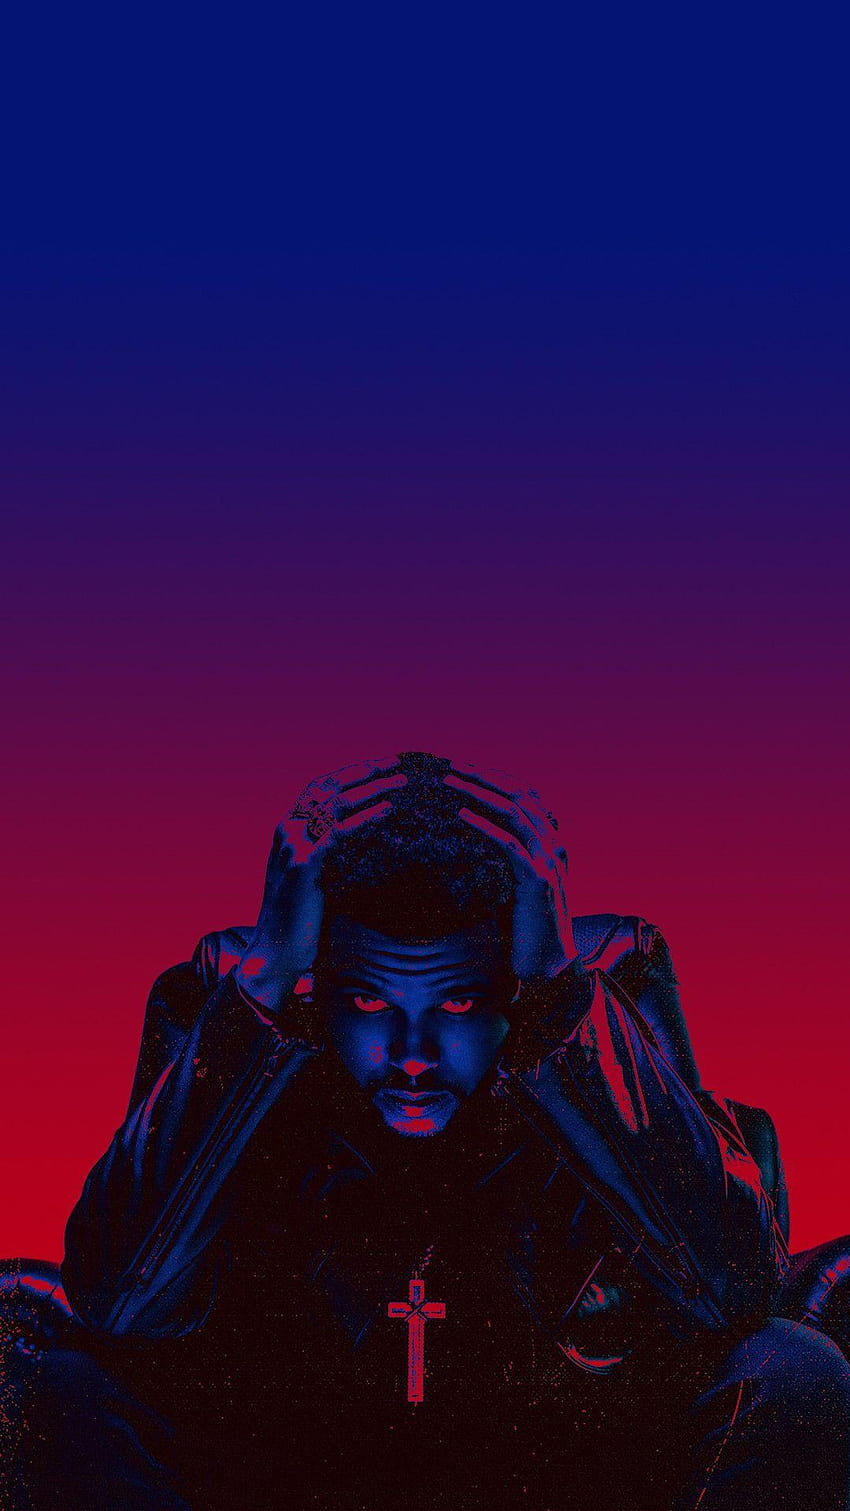 I created 5 of Cudis album covers as wallpapers for my iPhone 13 using the  DALLE AI  rKidCudi